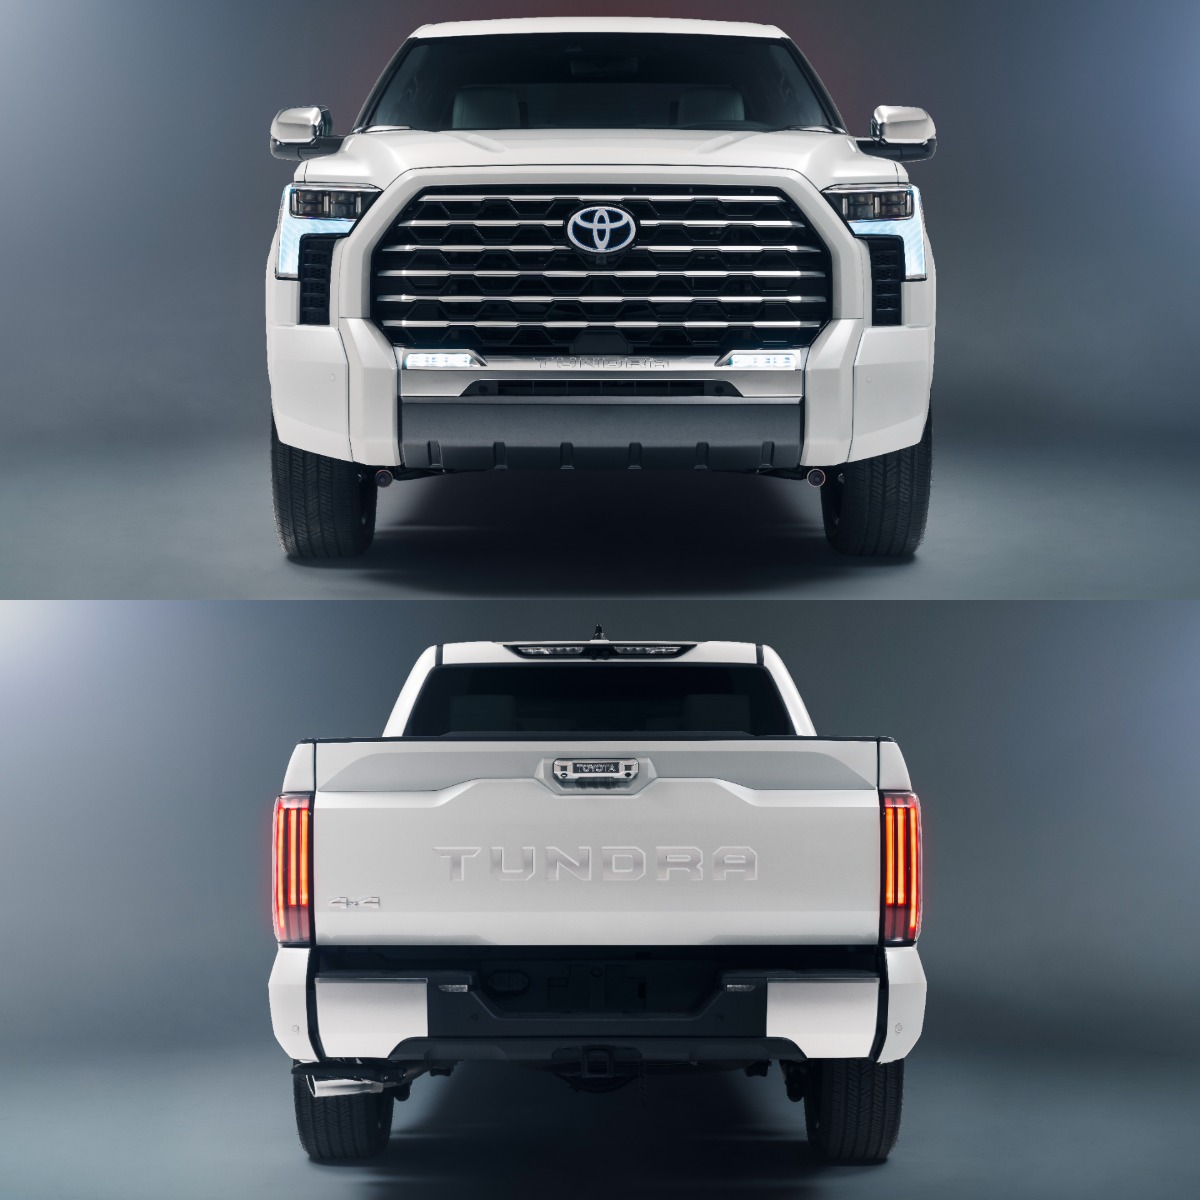 The 2022 Toyota Tundra Capstone pickup truck has a lot to offer